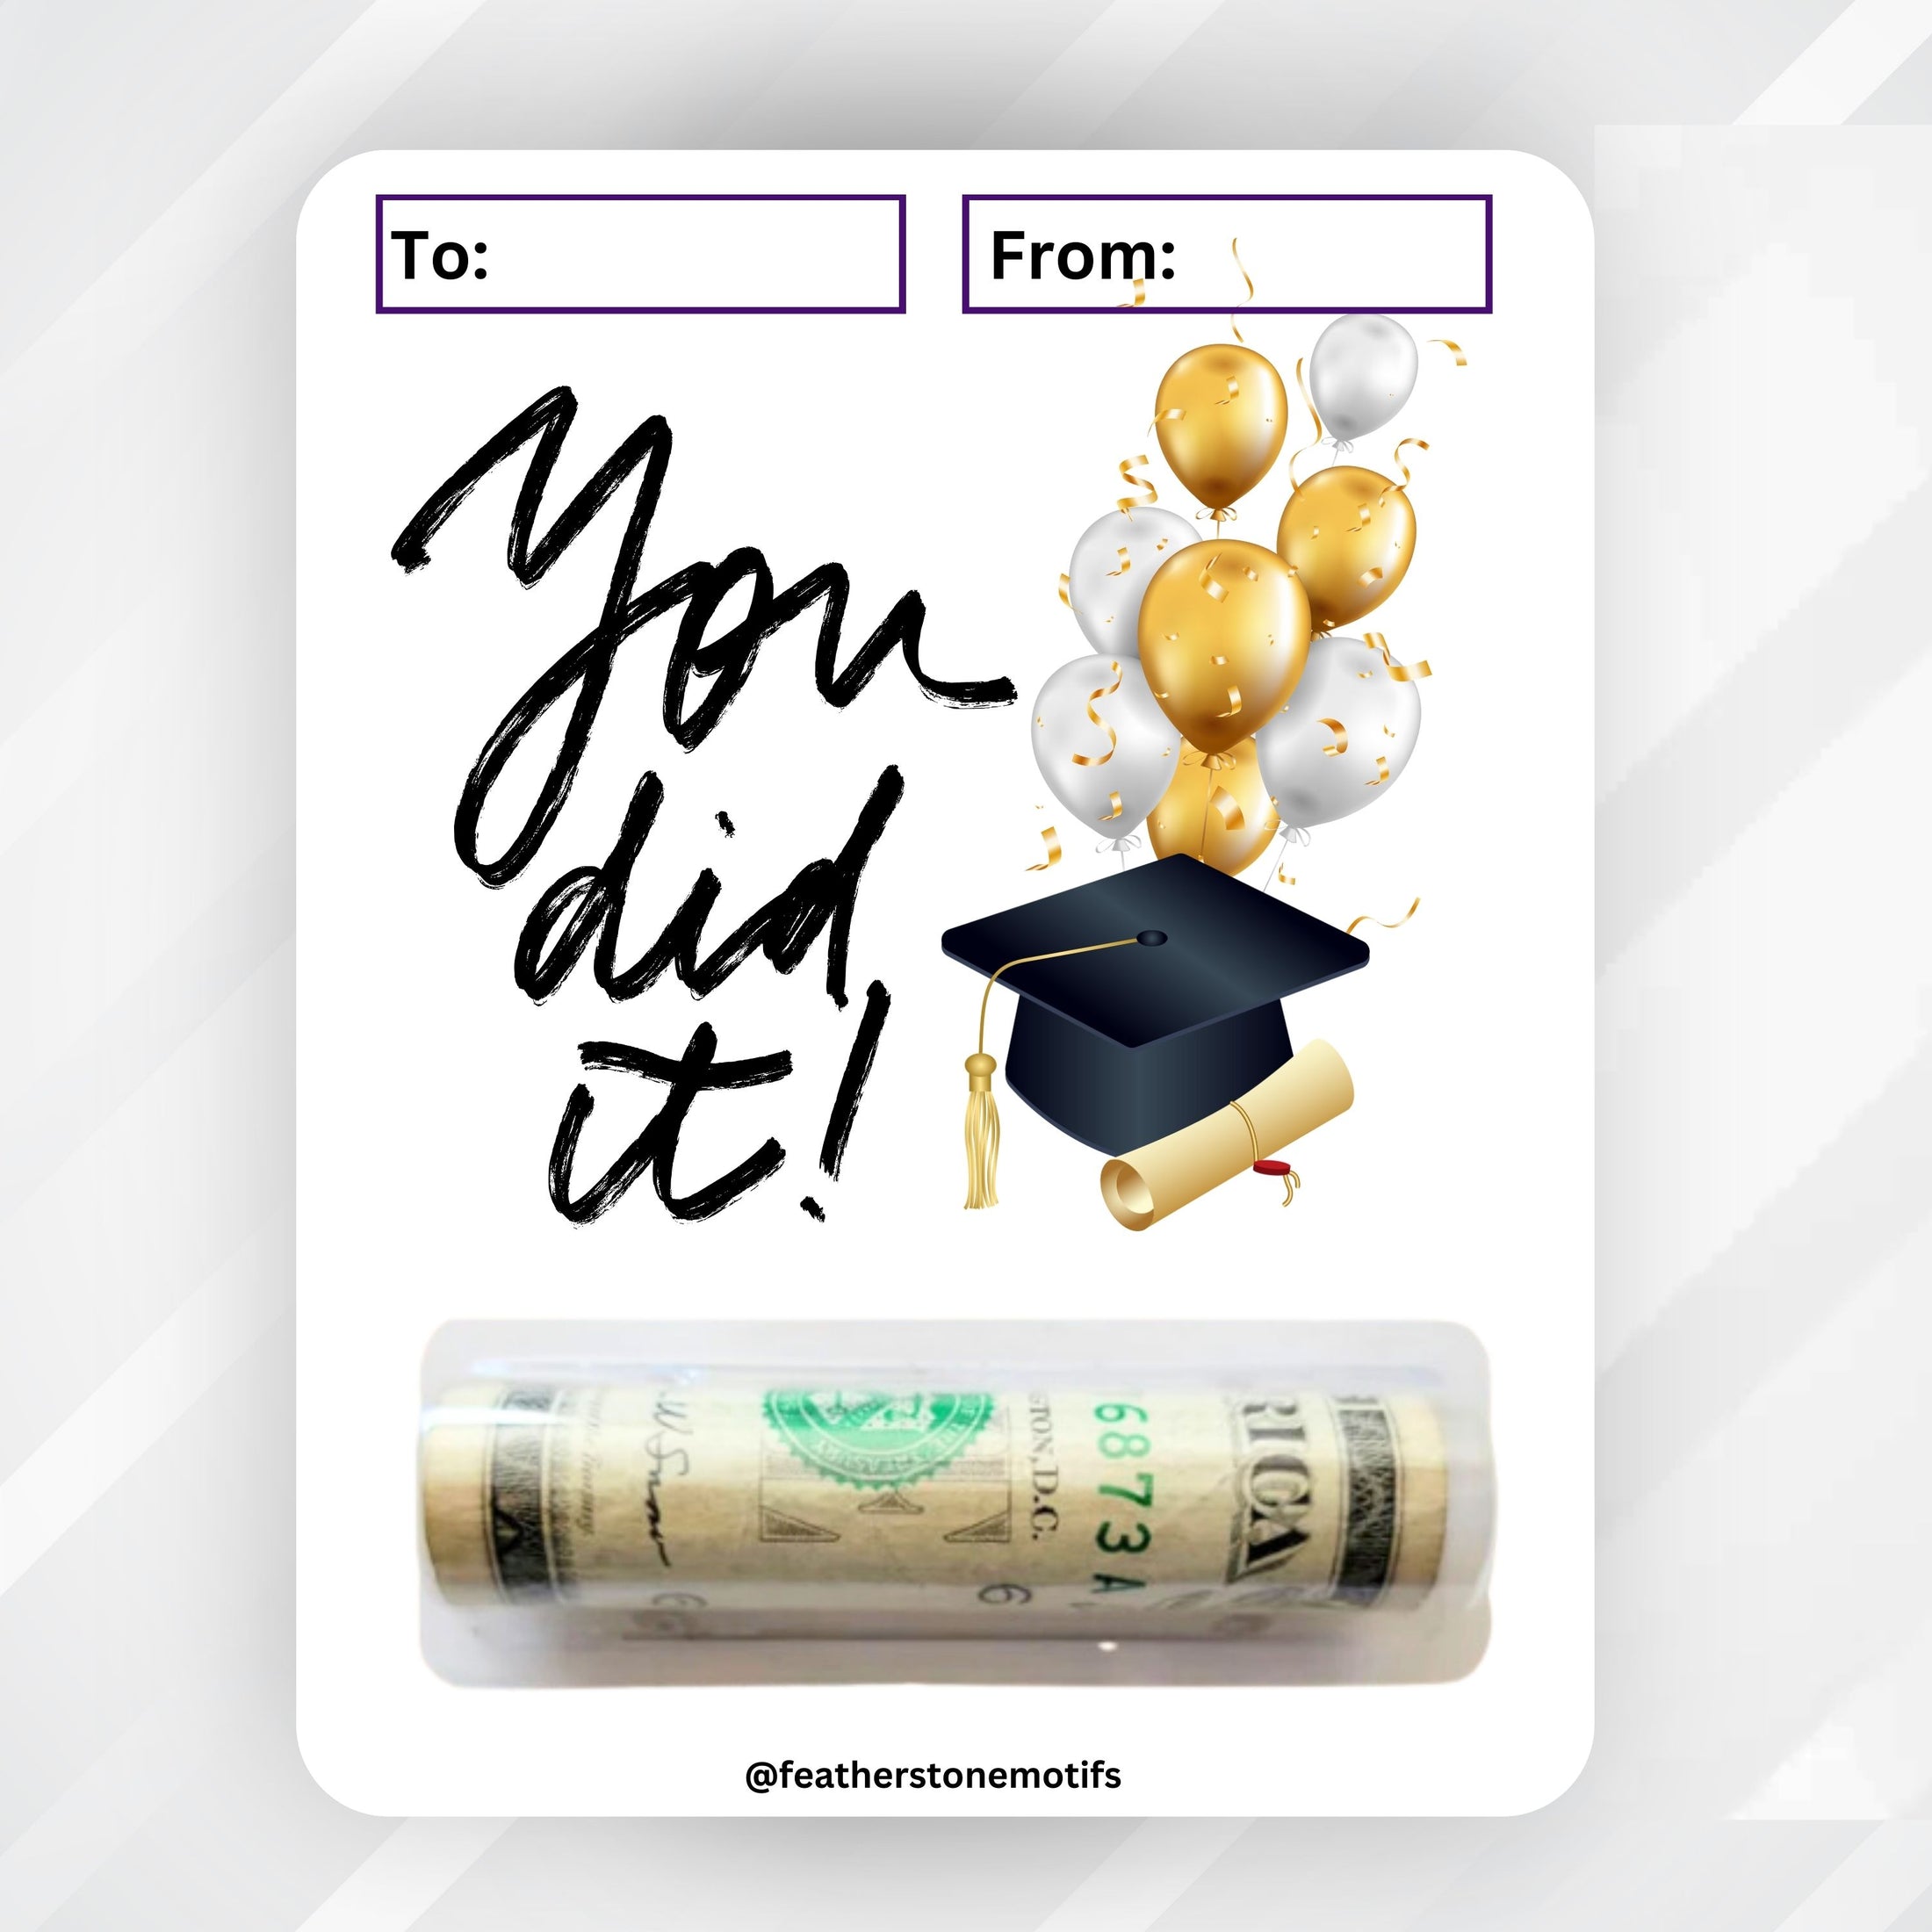 This image shows the money tube attached to the You Did It! Money Card.